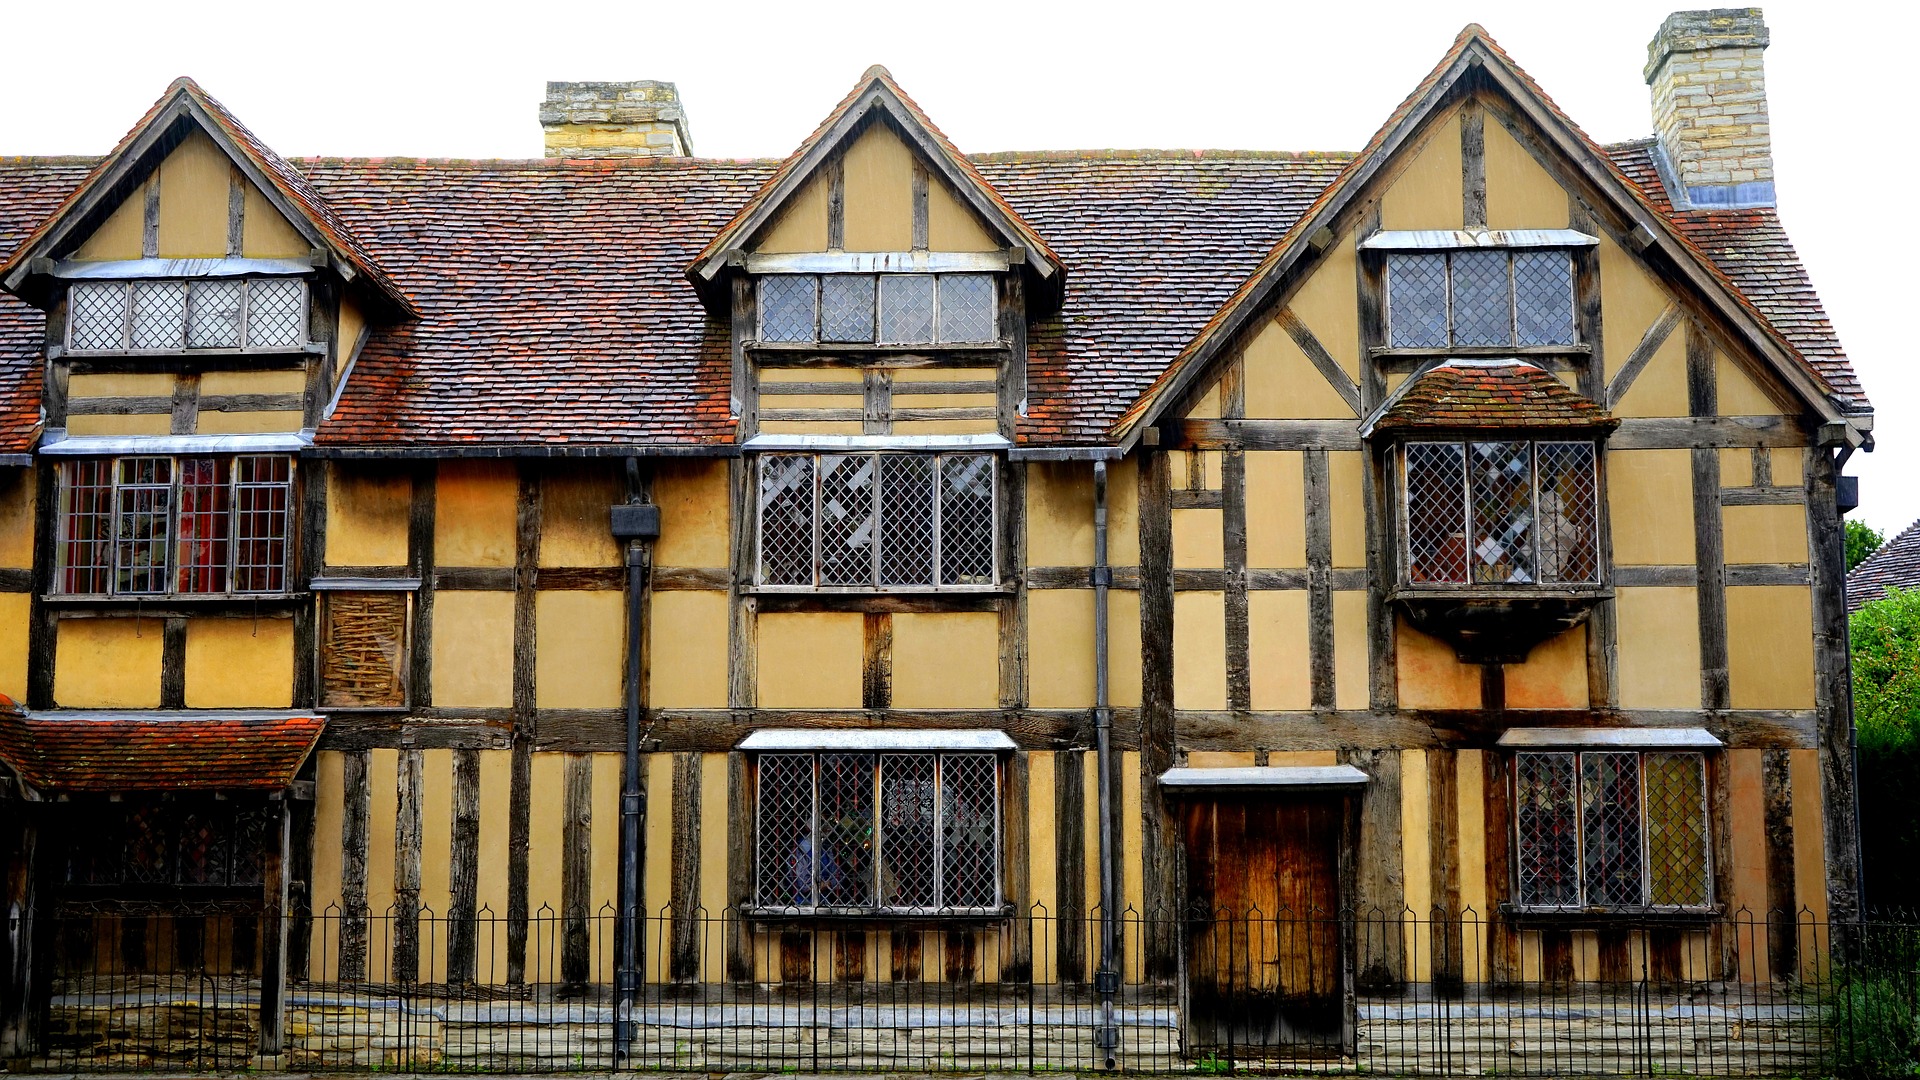 Shakespeare's birthplace in Stratford-Upon-Avon